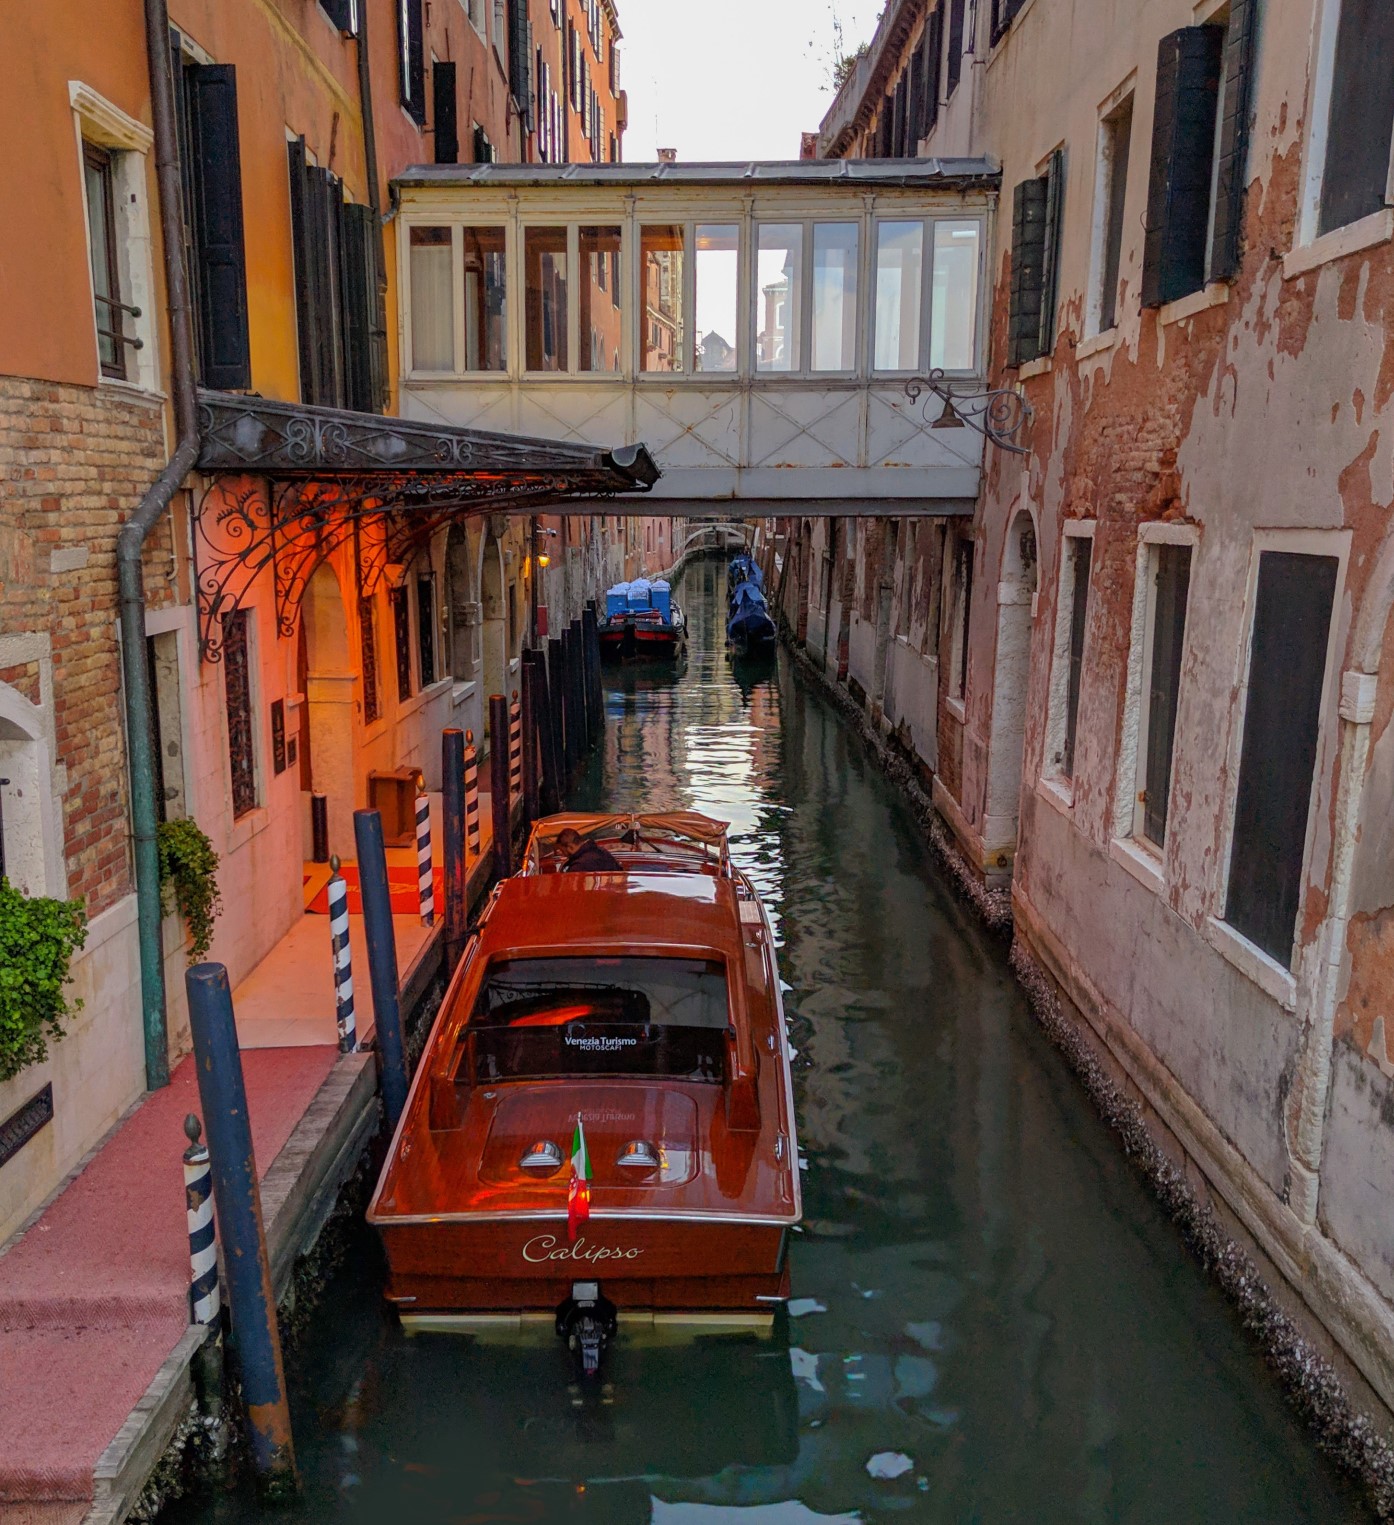 Yearning to unwind in opulent luxury? Would a magnificently restored 14th century Venetian palace do the trick? Then visit the Hotel Danieli in Venice Italy.